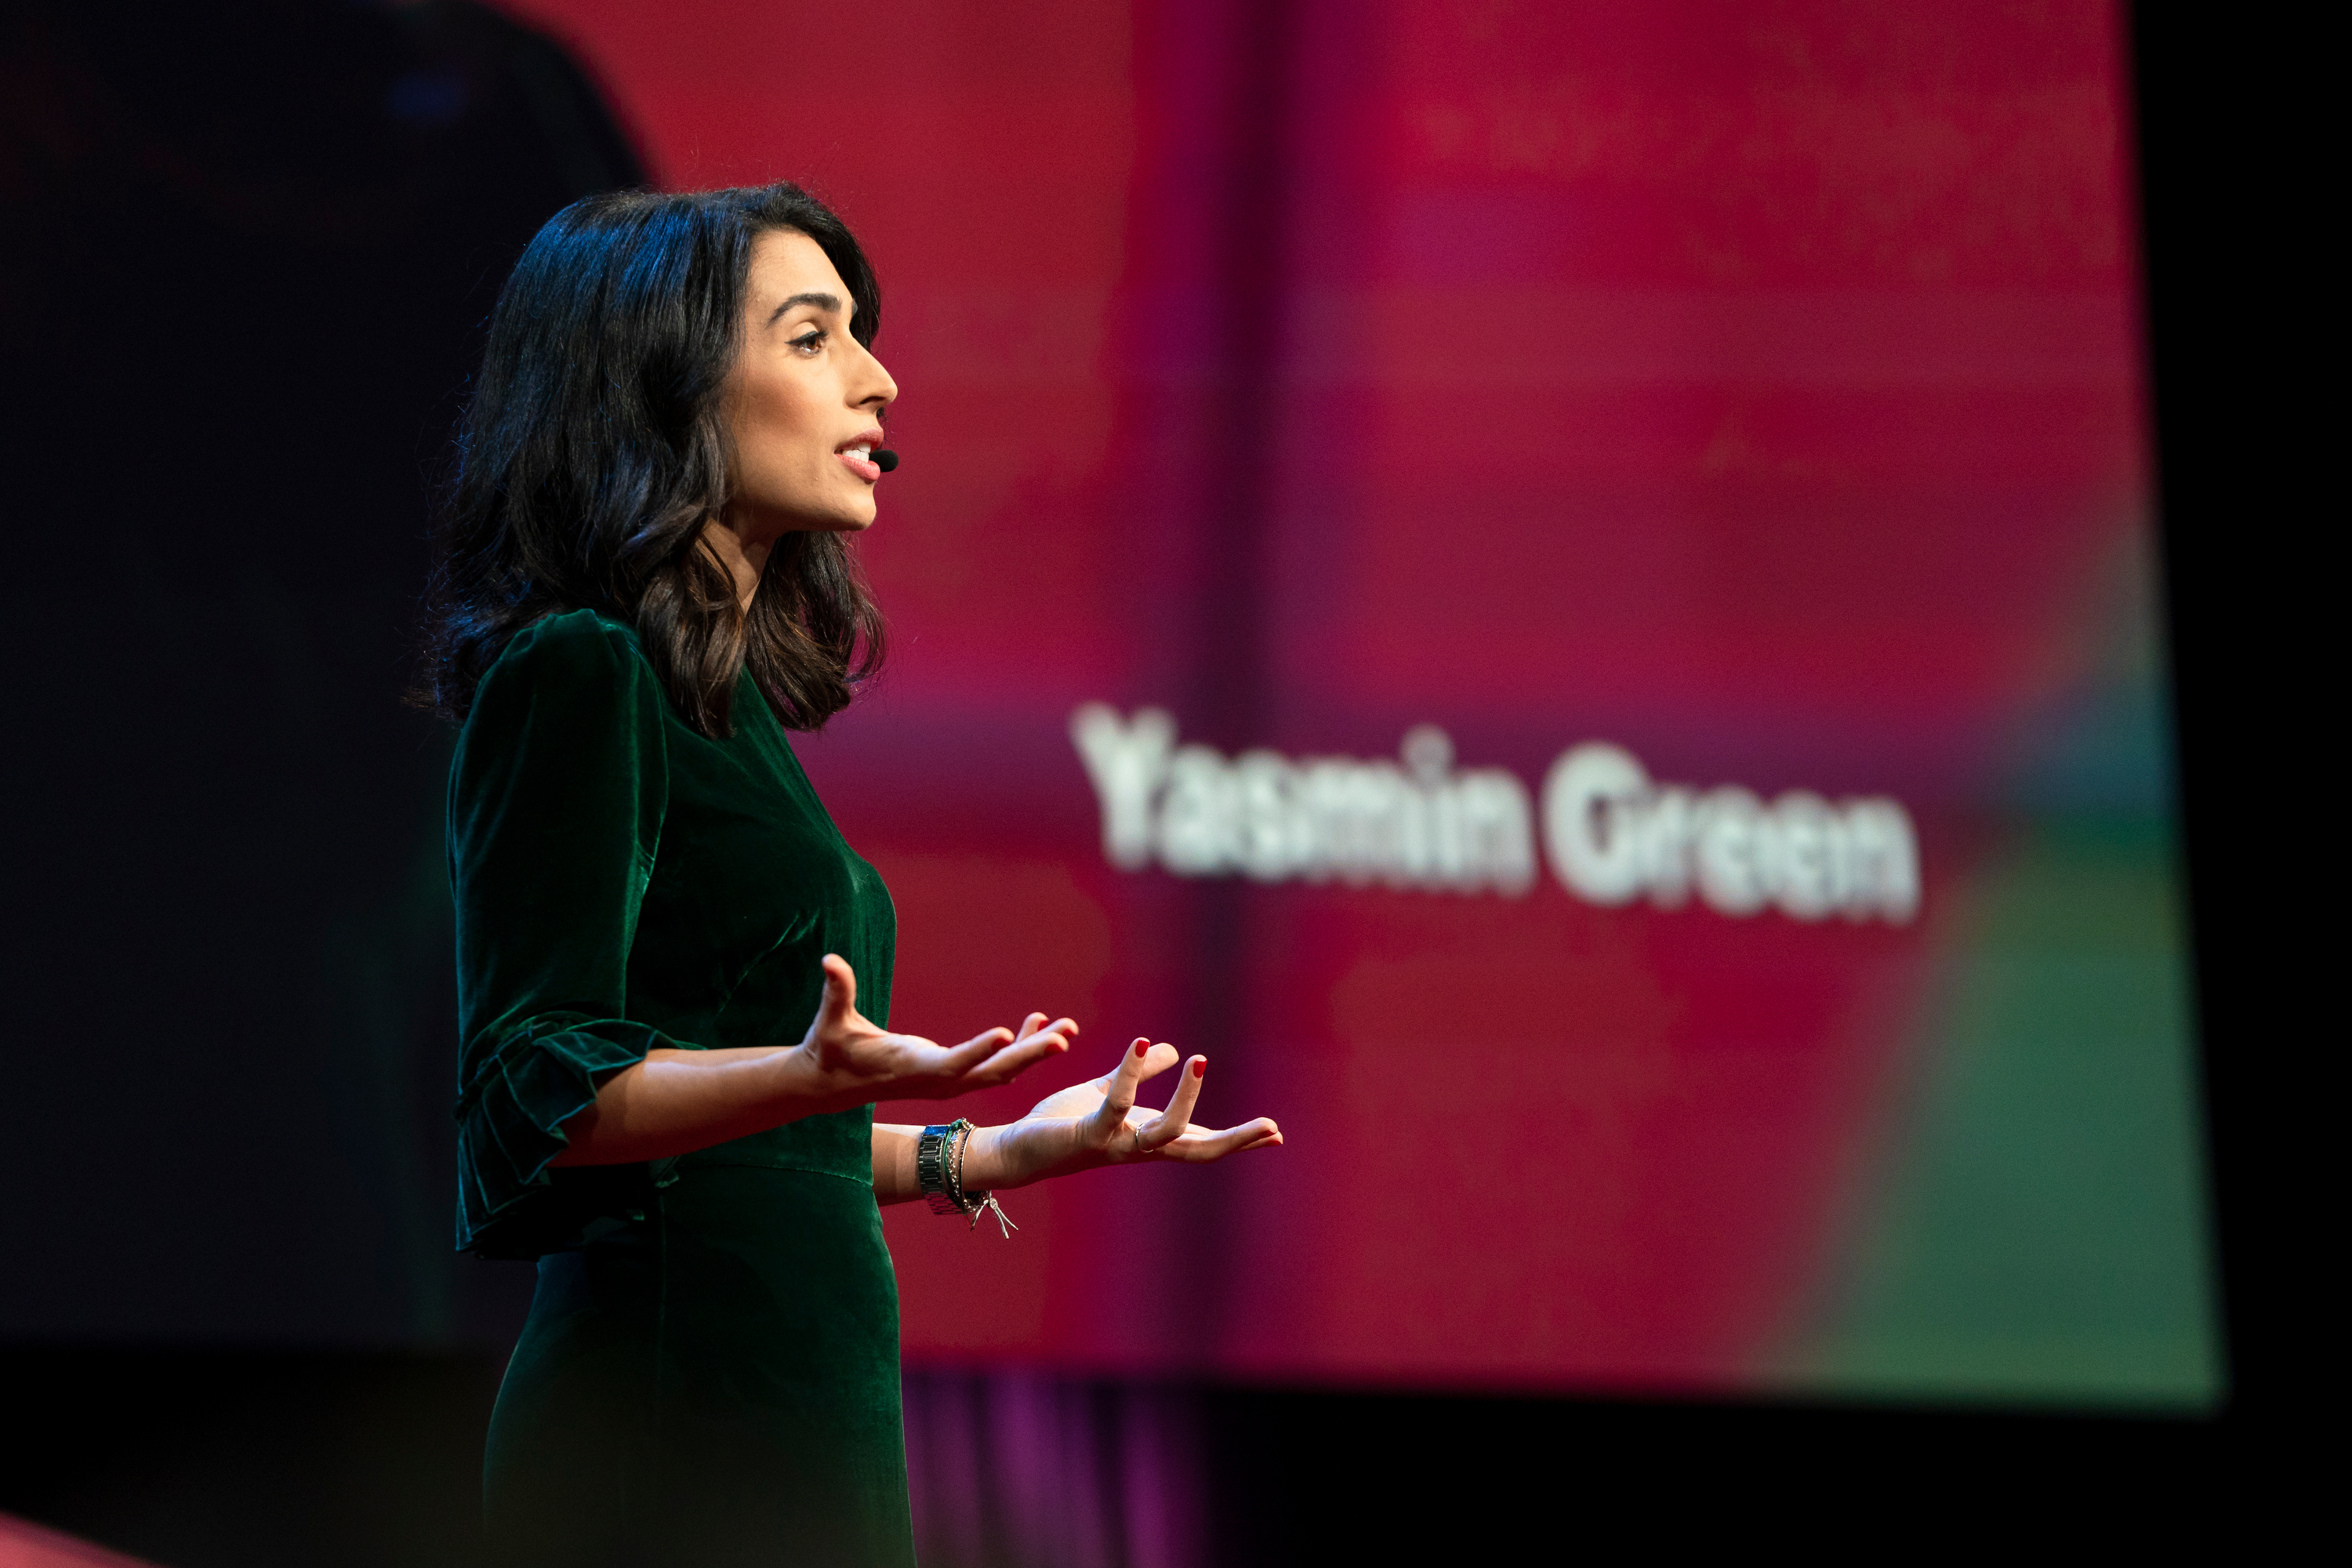 Insanity. Humanity. Notes from Session 8 at TED2018